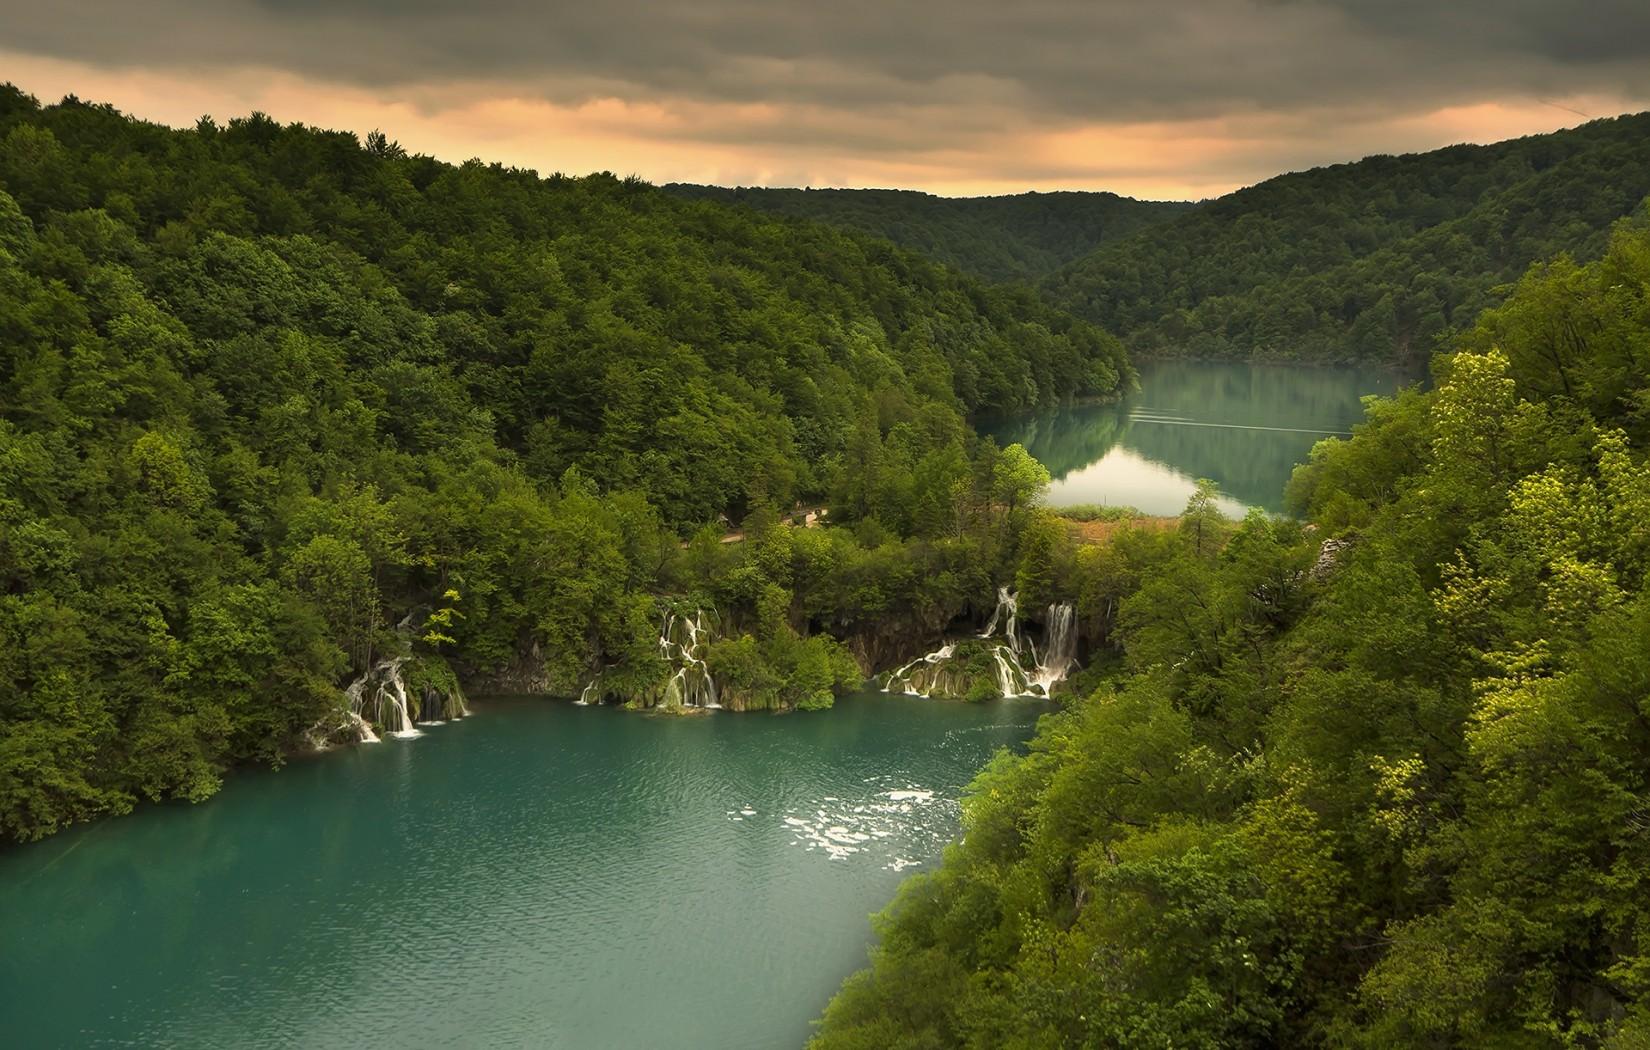 Download 1650x1050 Croatia, Plitvice Lakes National Park, Forest